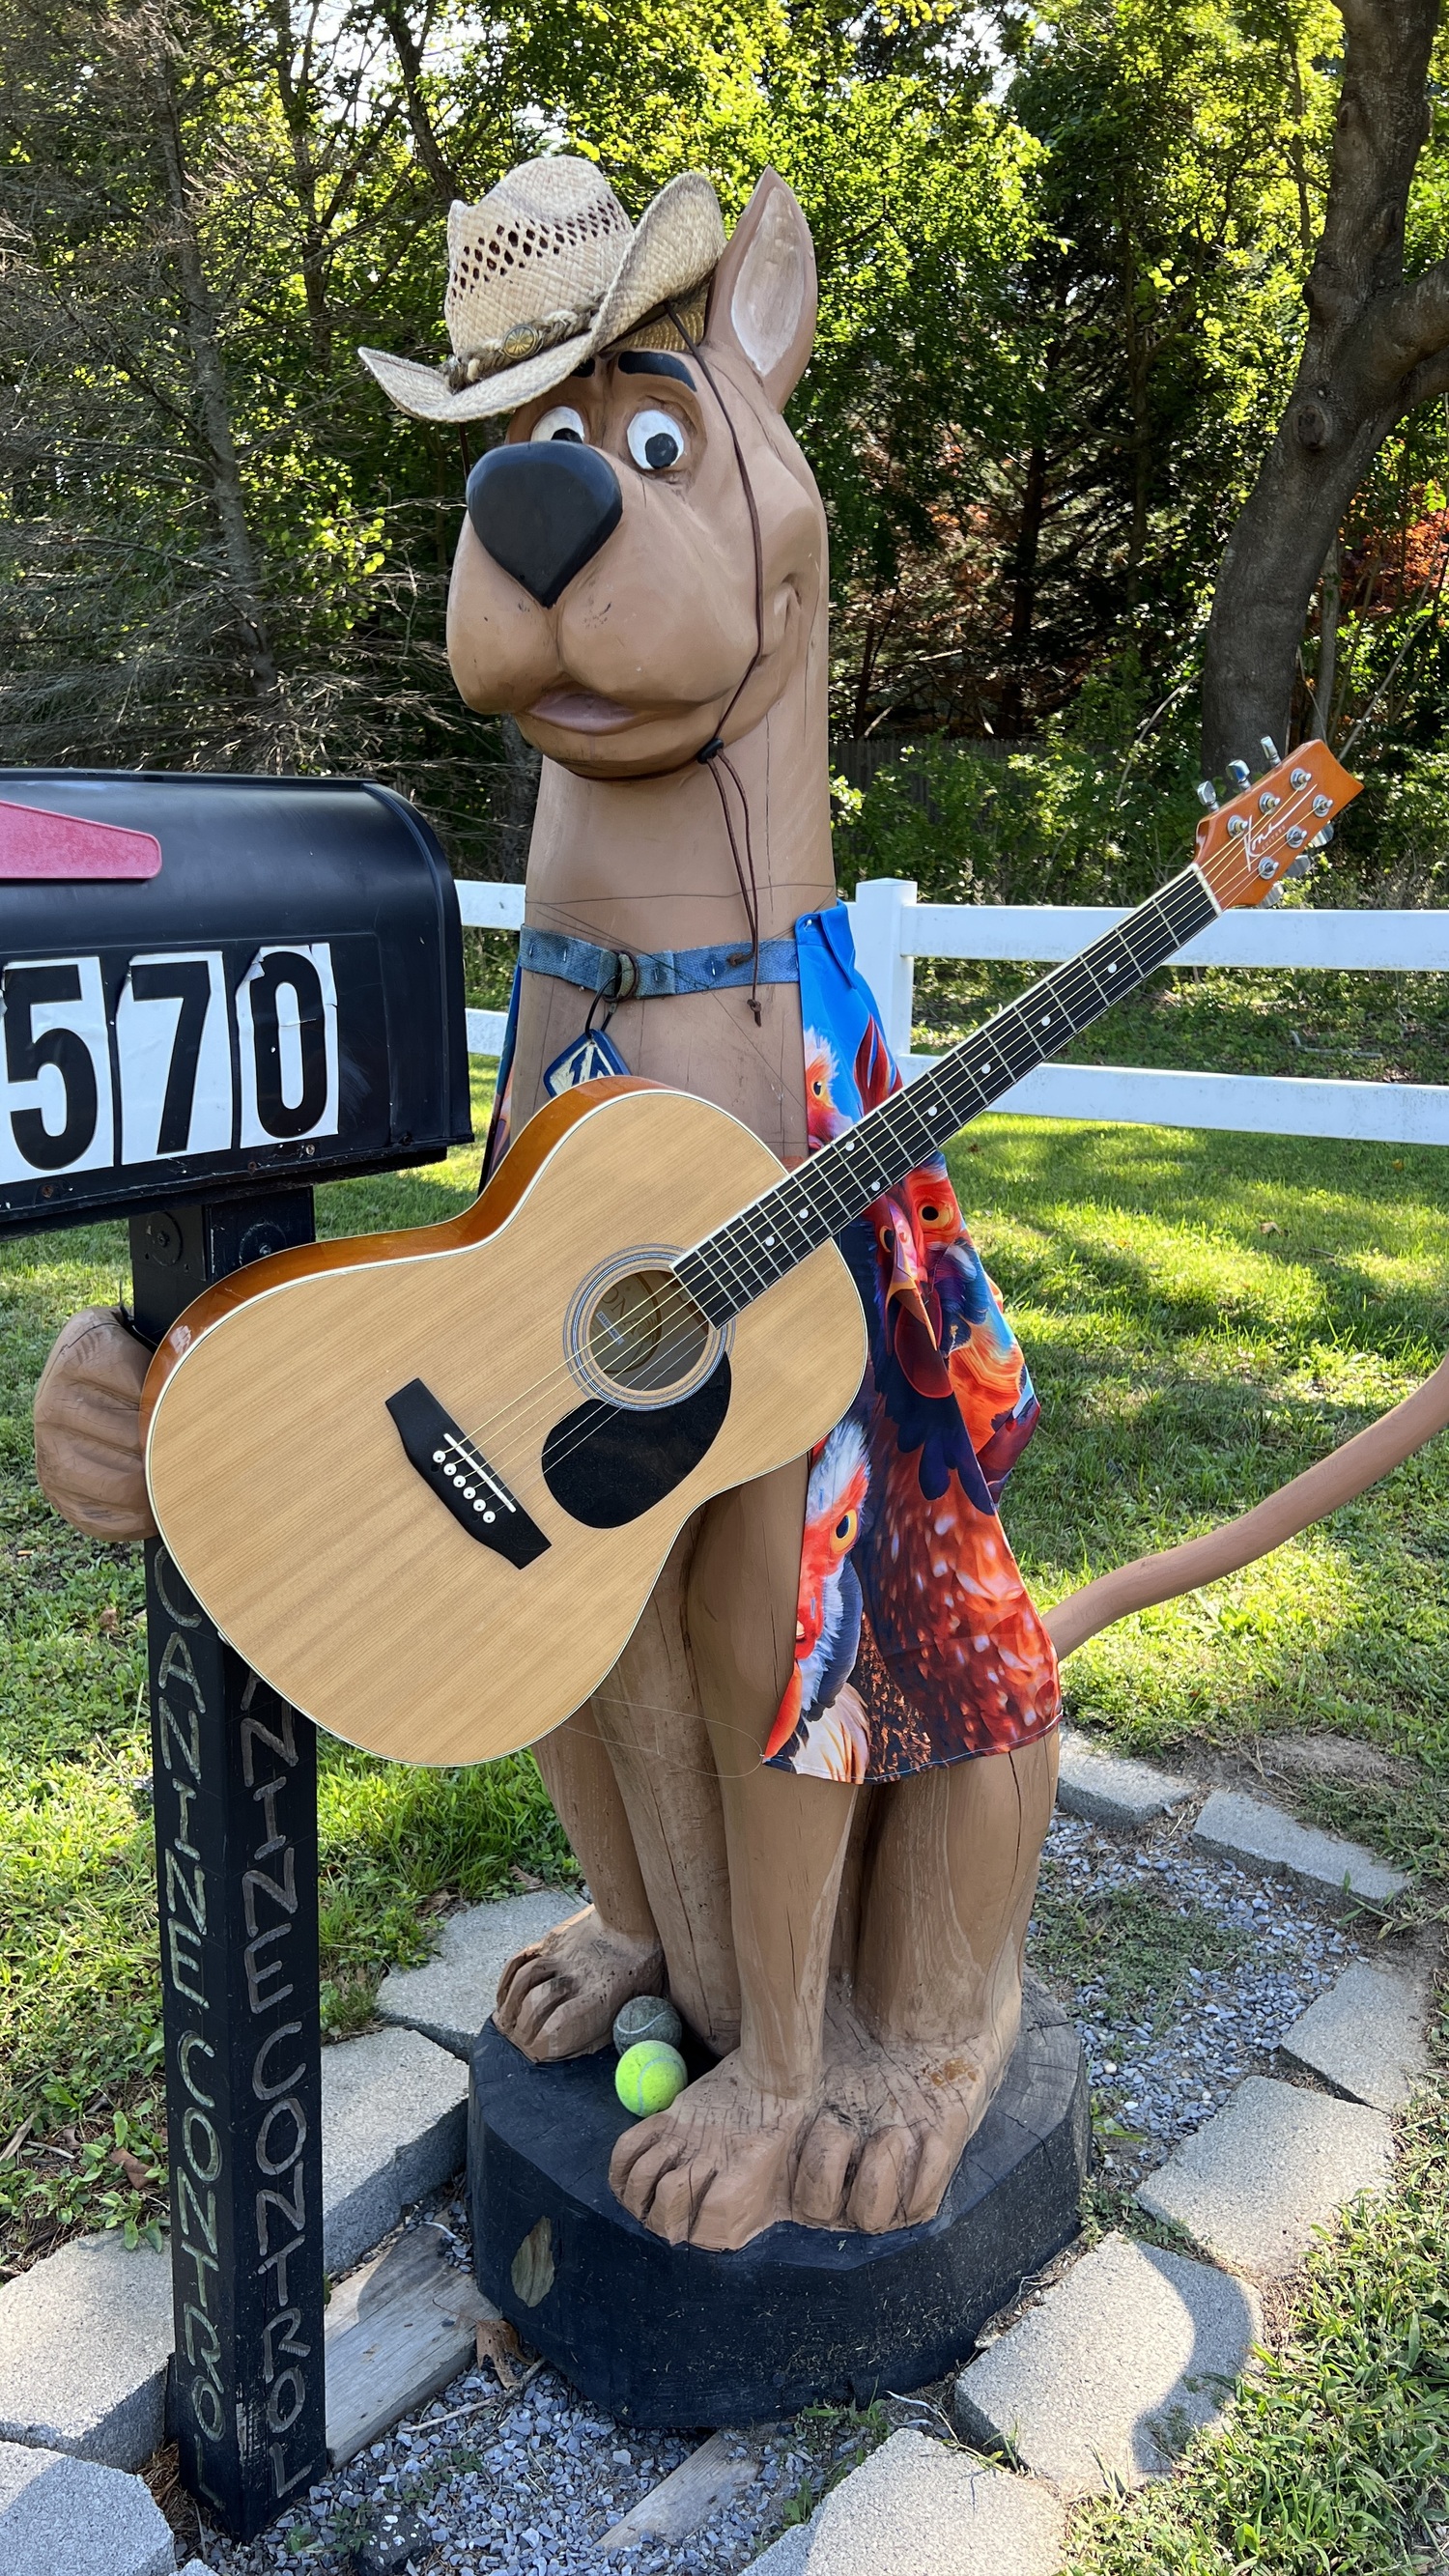 The North Sea Scooby Doo dressed in honor of Jimmy Buffett. MICHELLE MALONE